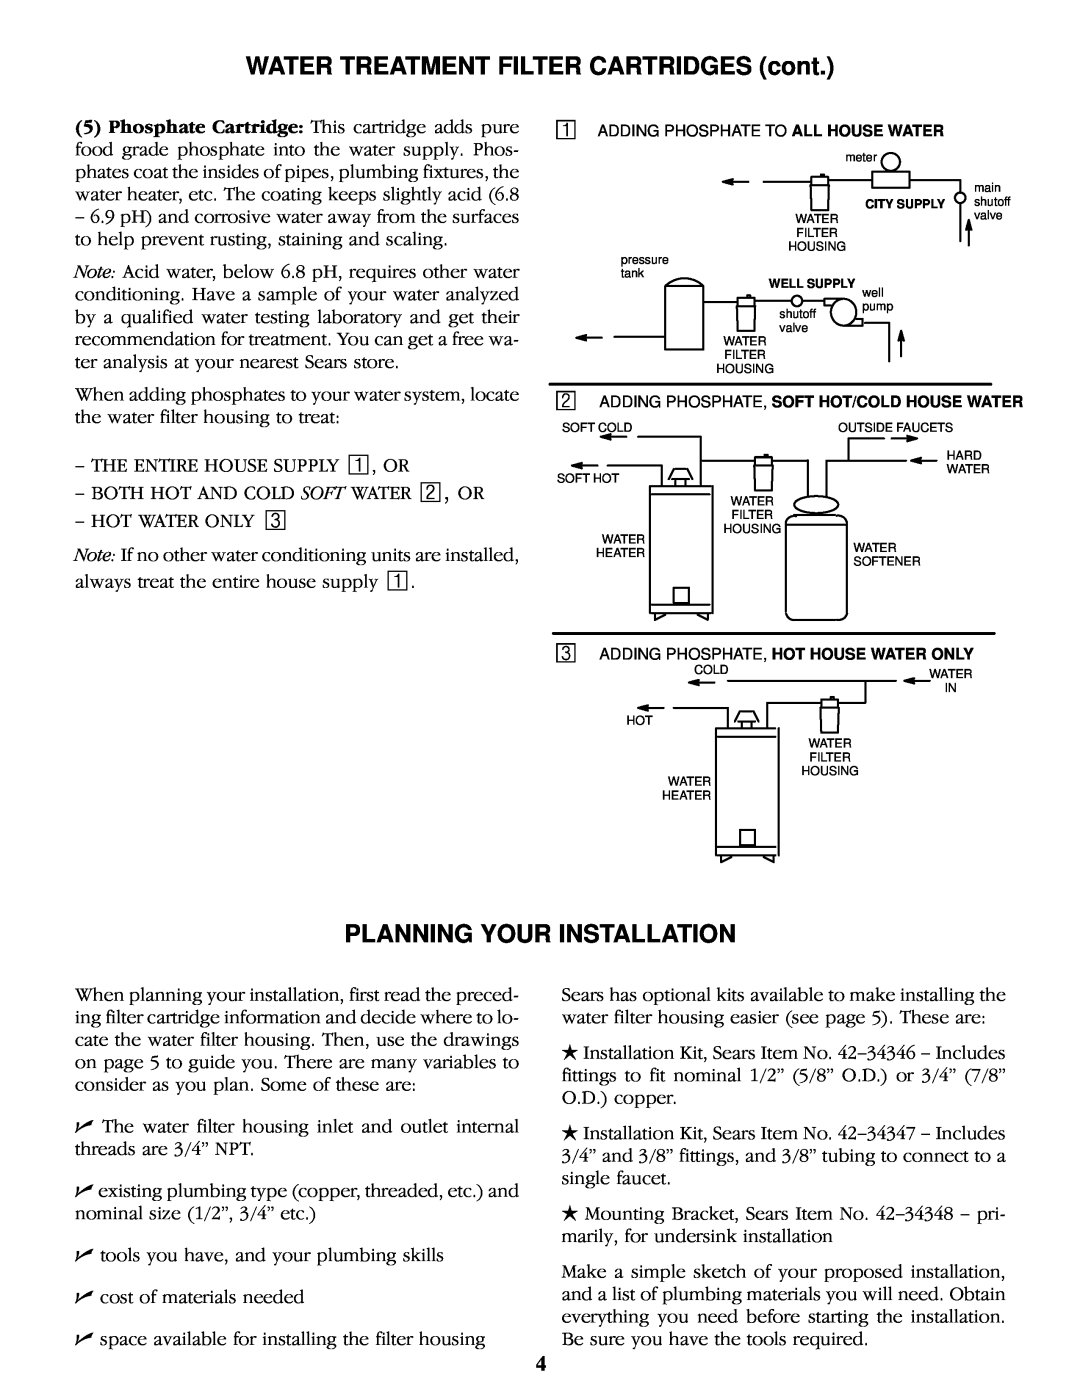 Kenmore 625.343400 operating instructions WATER TREATMENT FILTER CARTRIDGES cont, Planning Your Installation 